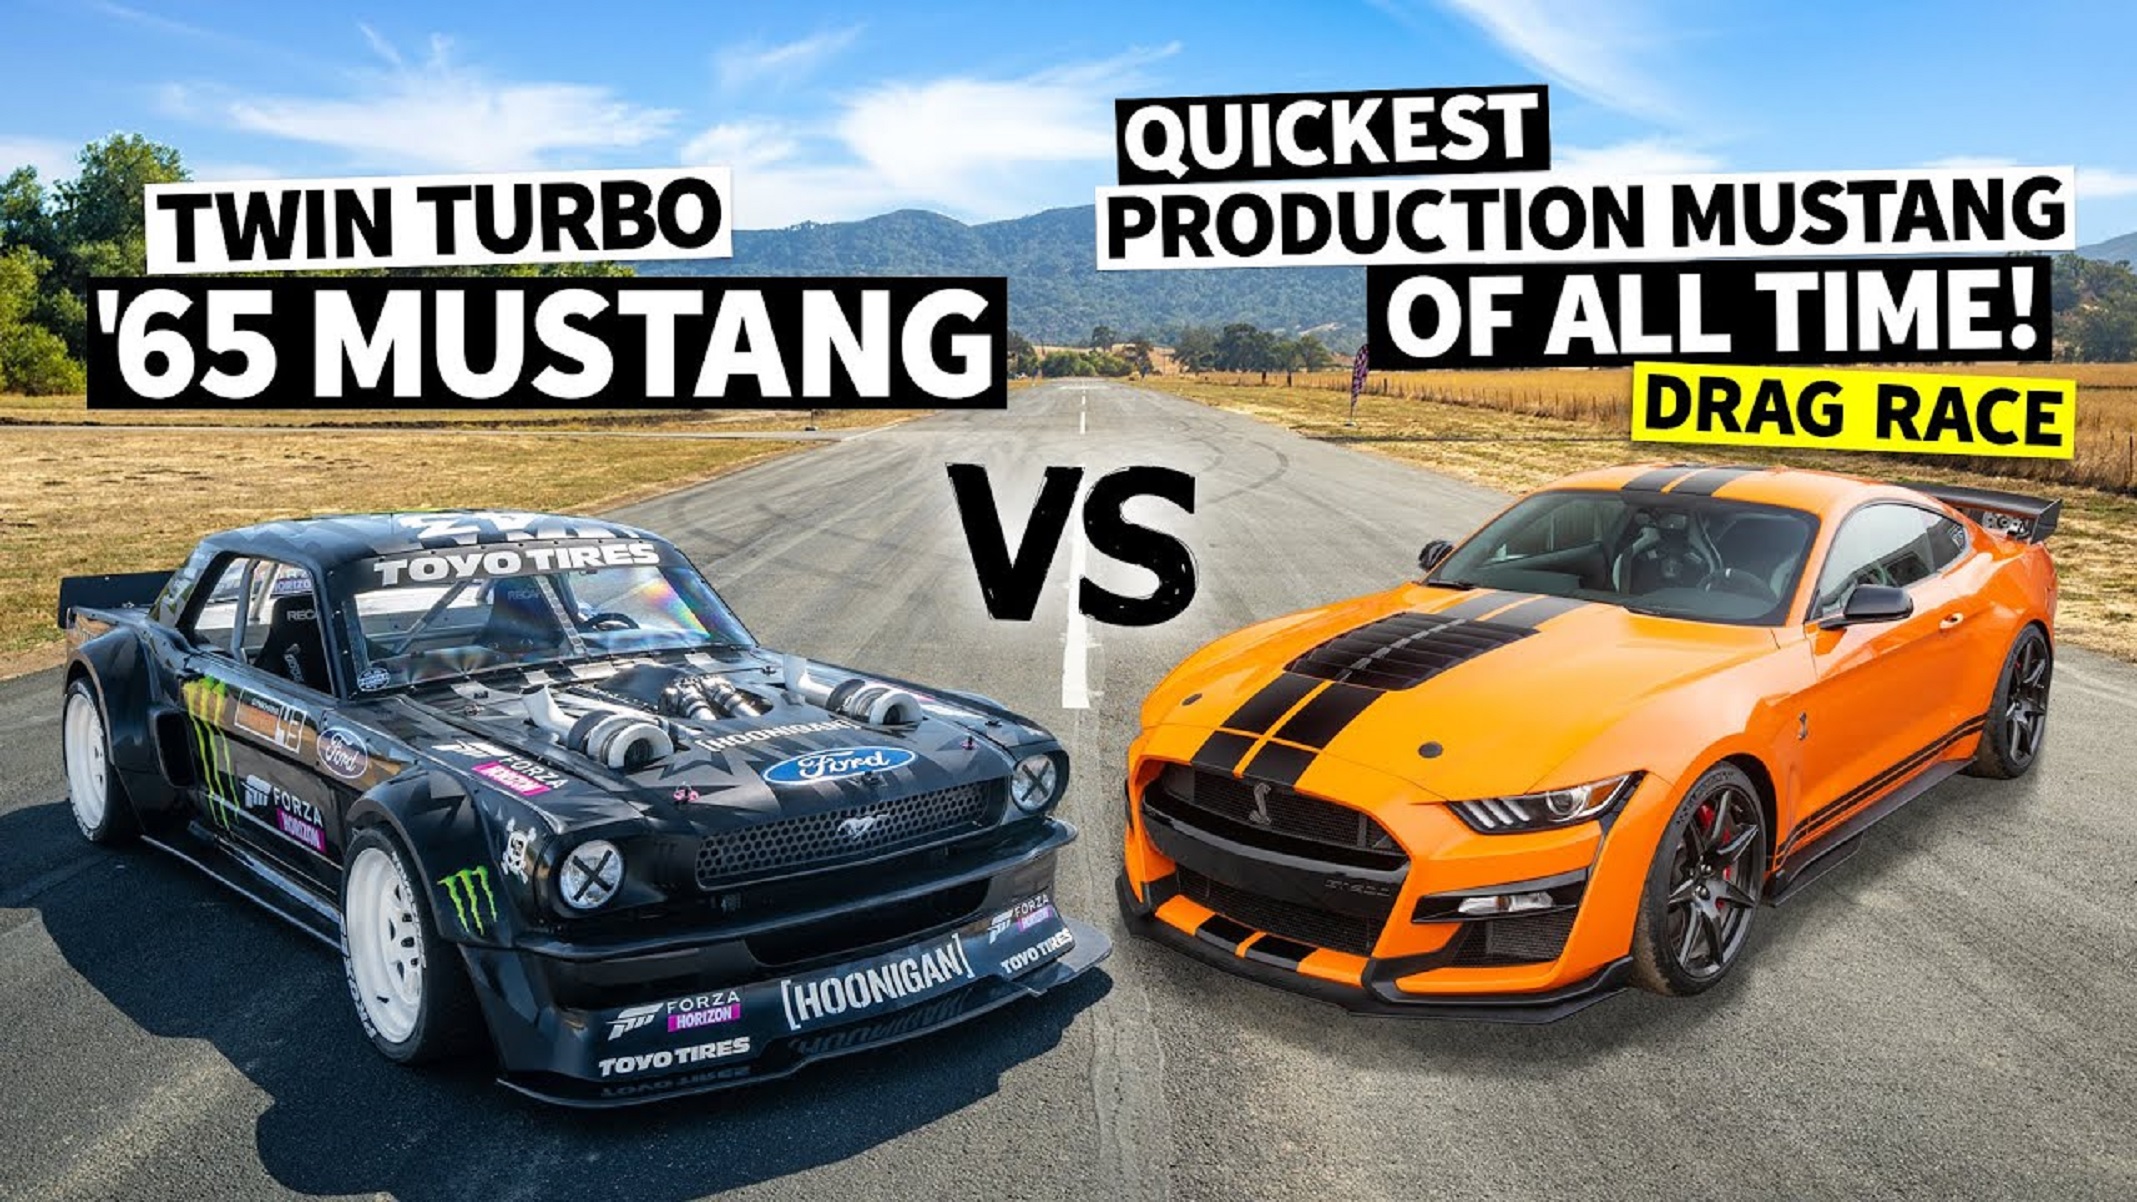 Ken Block's camo 1965 Ford Mustang Hoonicorn RTR V2 next to an orange-and-black 2020 Ford Mustang Shelby GT500